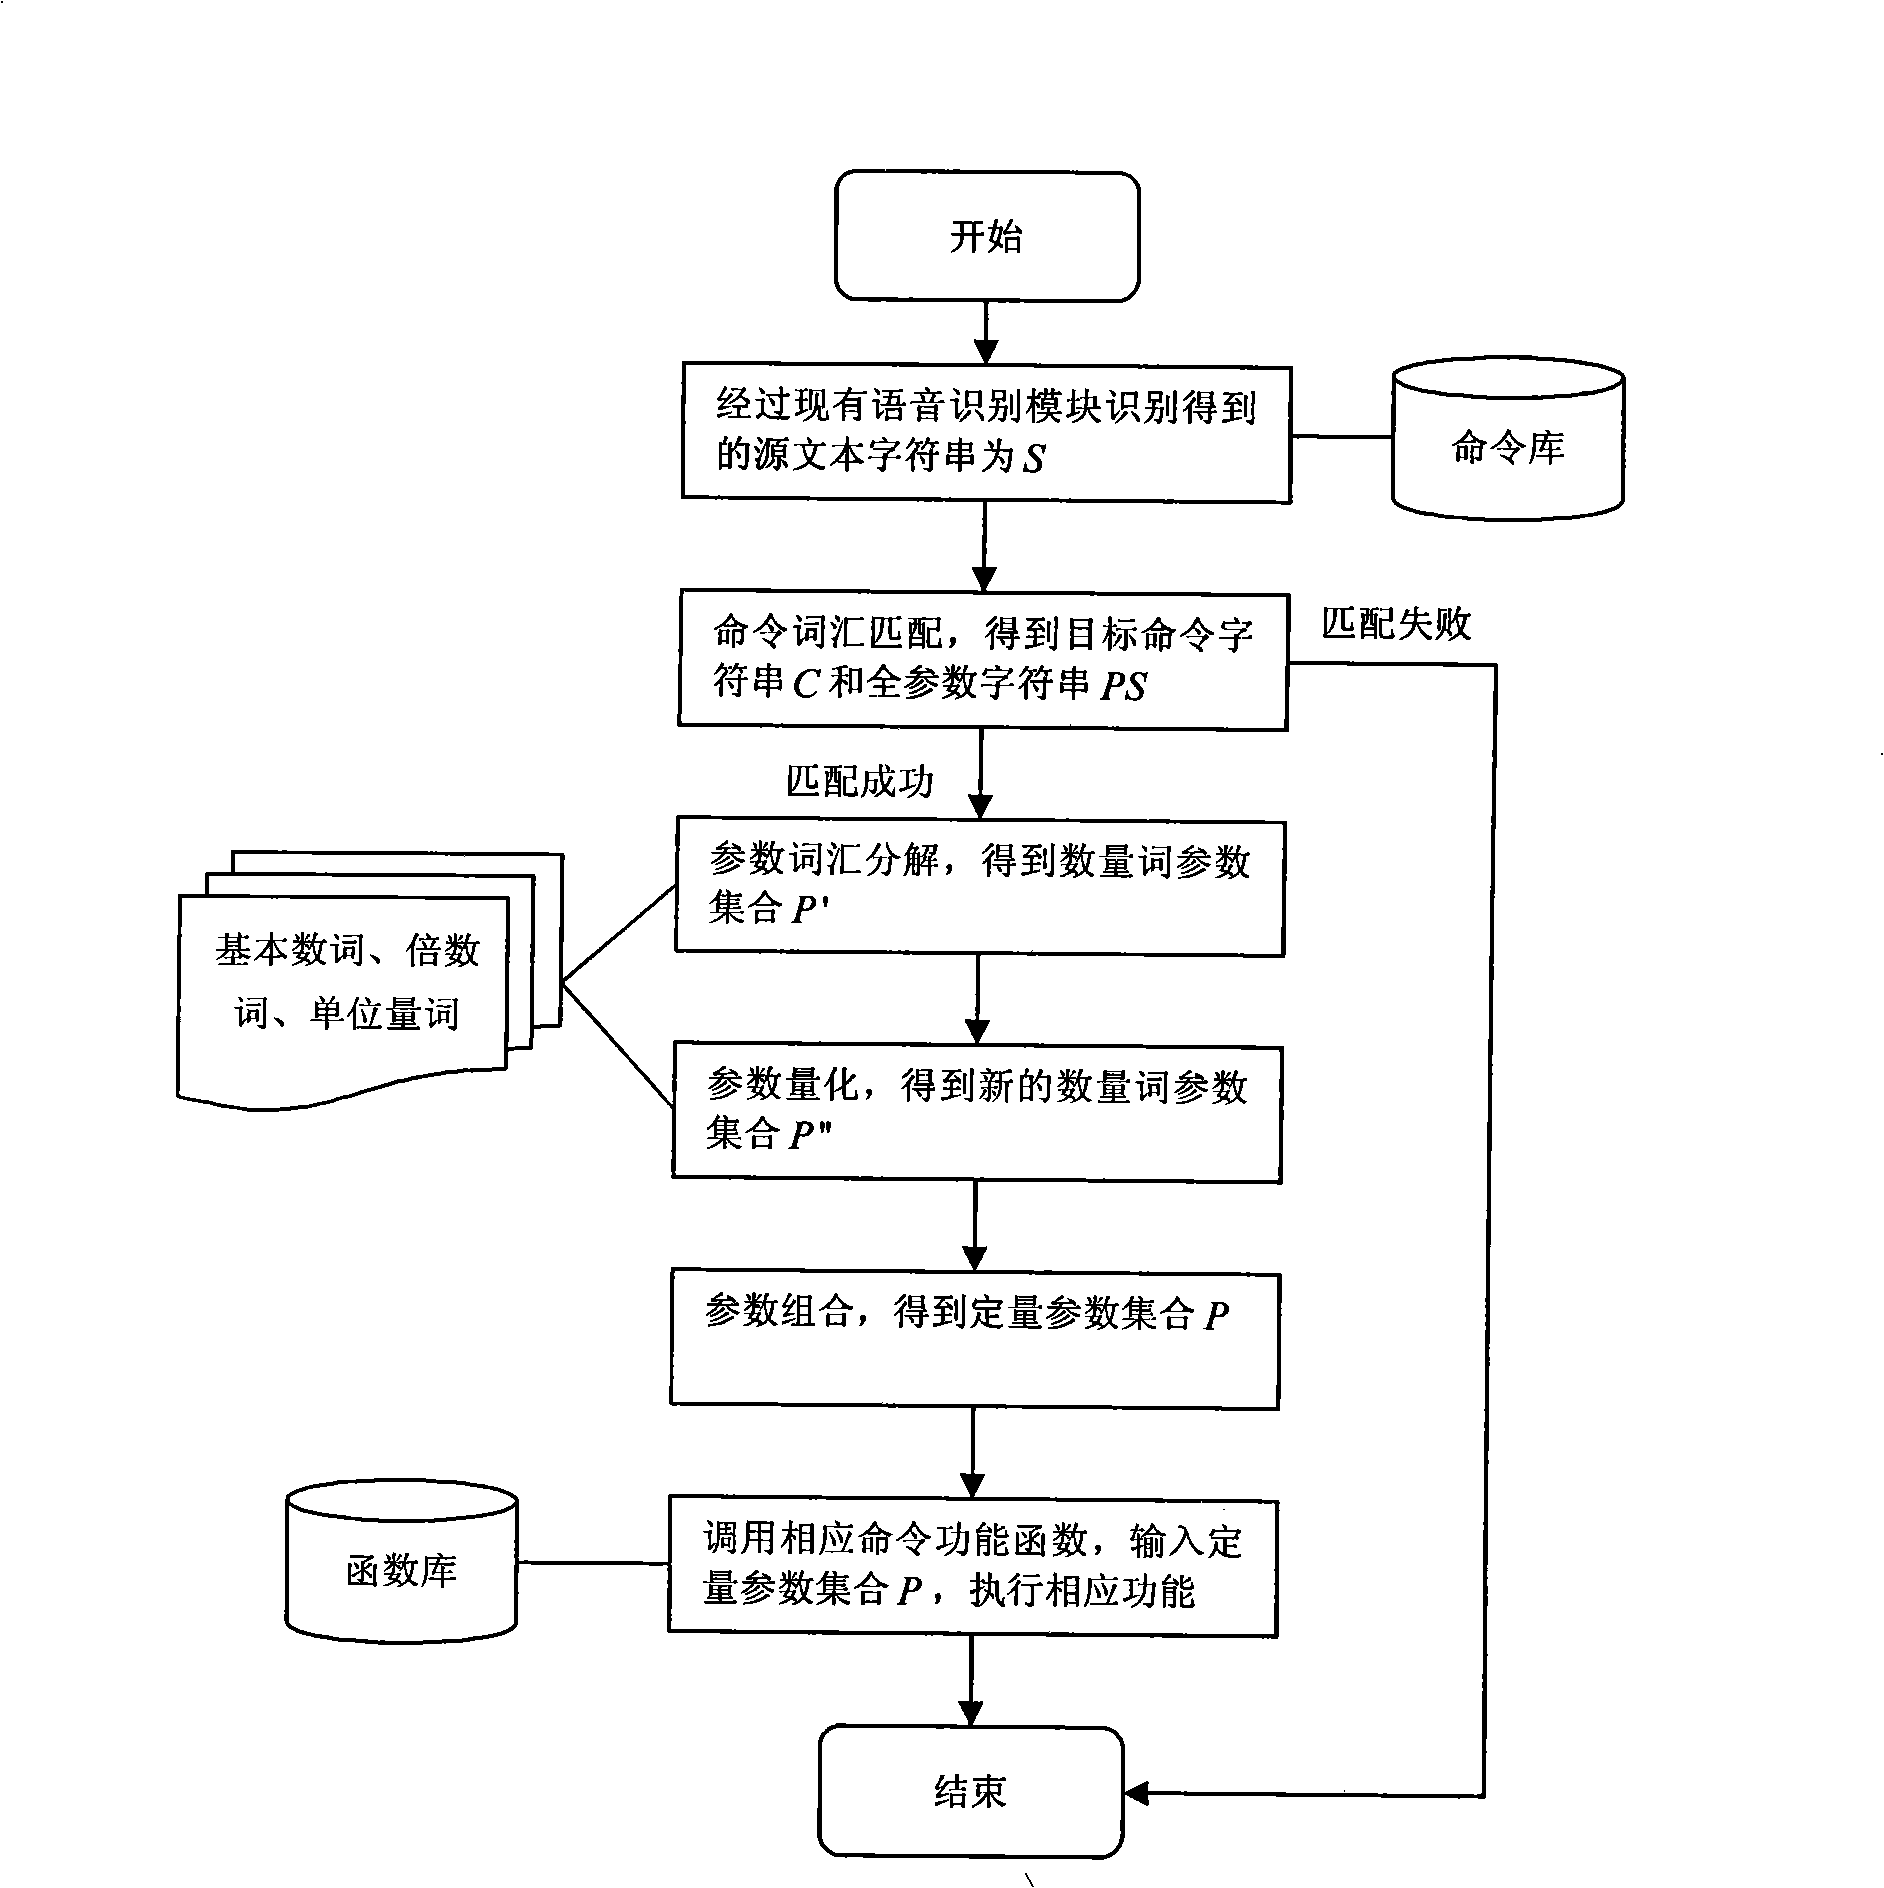 Speech control method of geographic information system with quantitative parameter